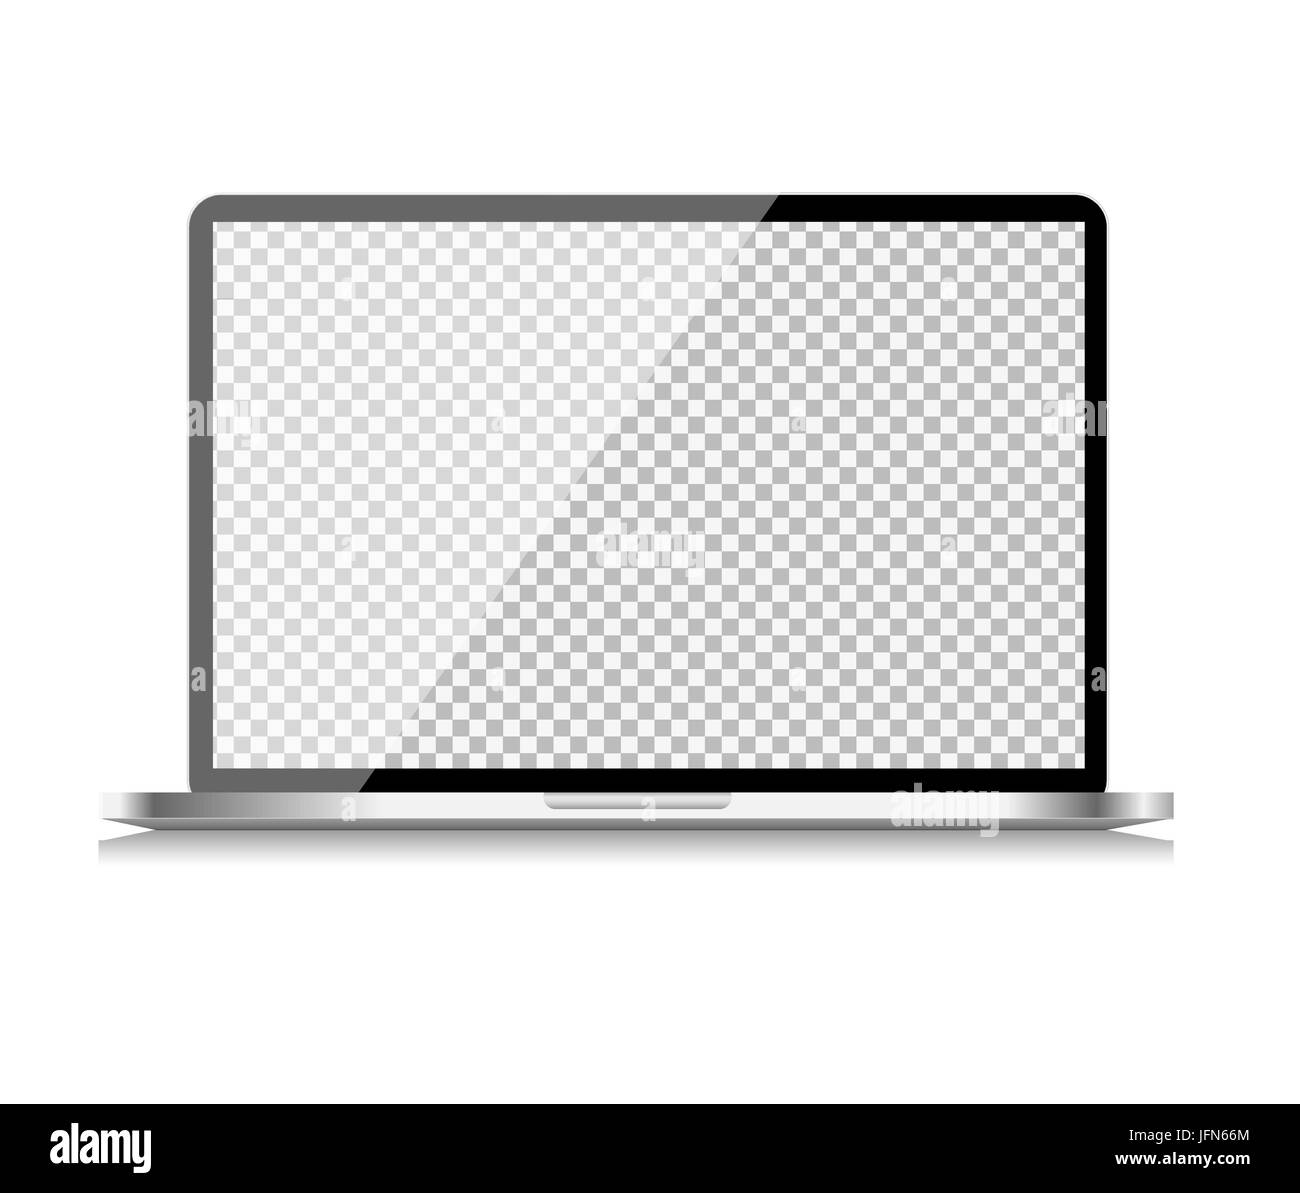 Realistic Computer Laptop with Transparent Wallpaper on Screen Isolated on White Background. Vector Illustration Stock Vector